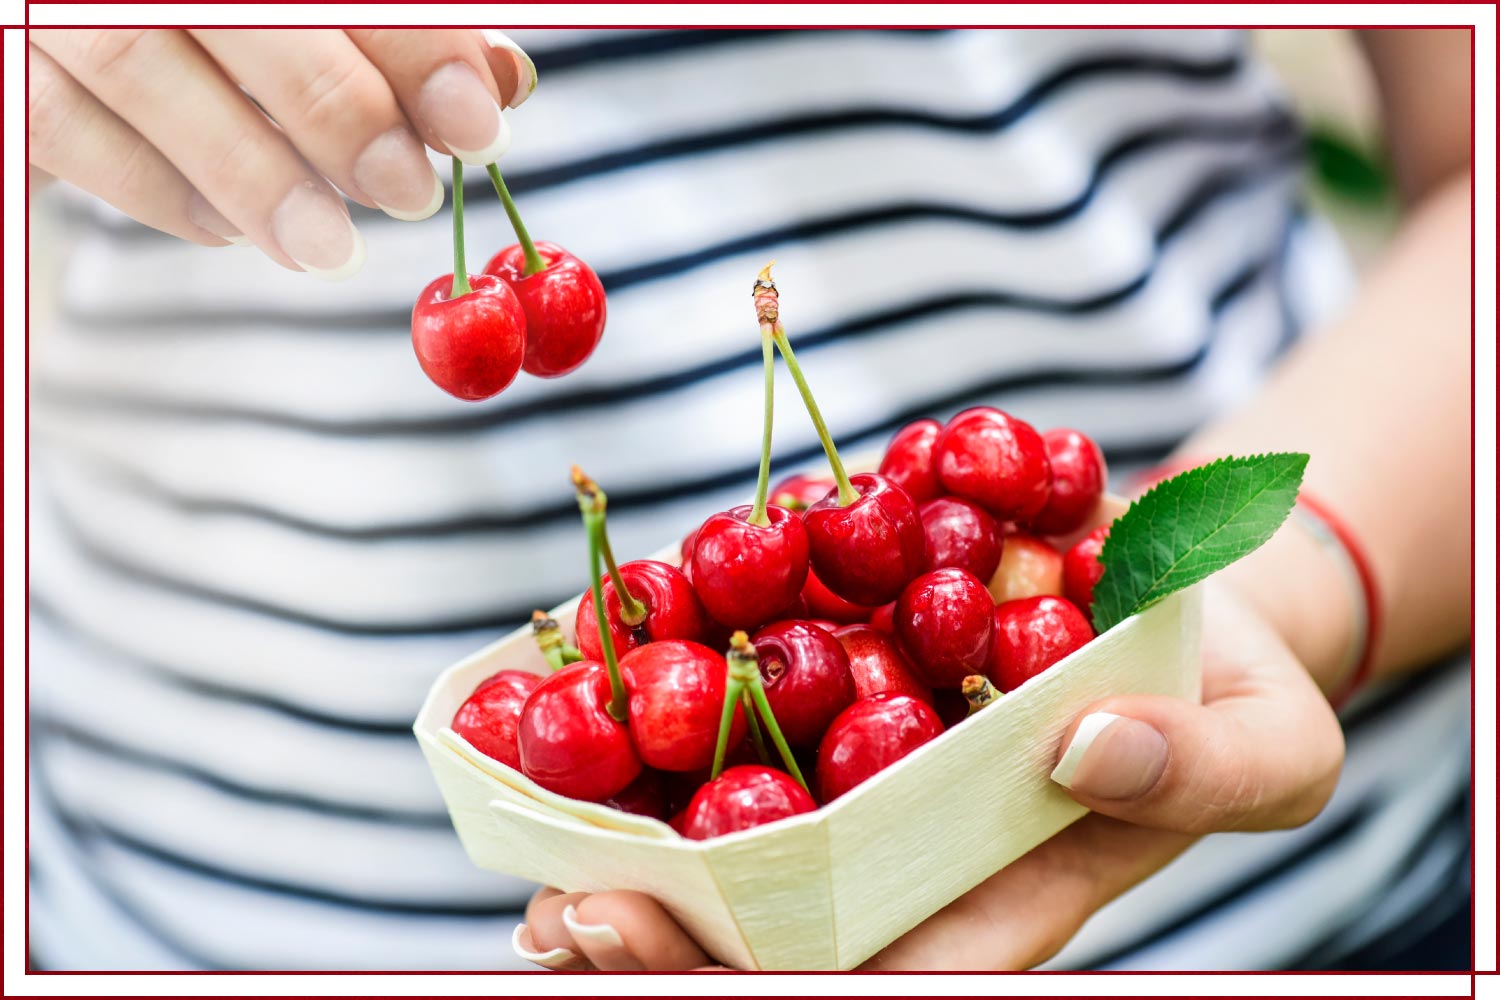 Is Cherry a Fruit or a Berry?